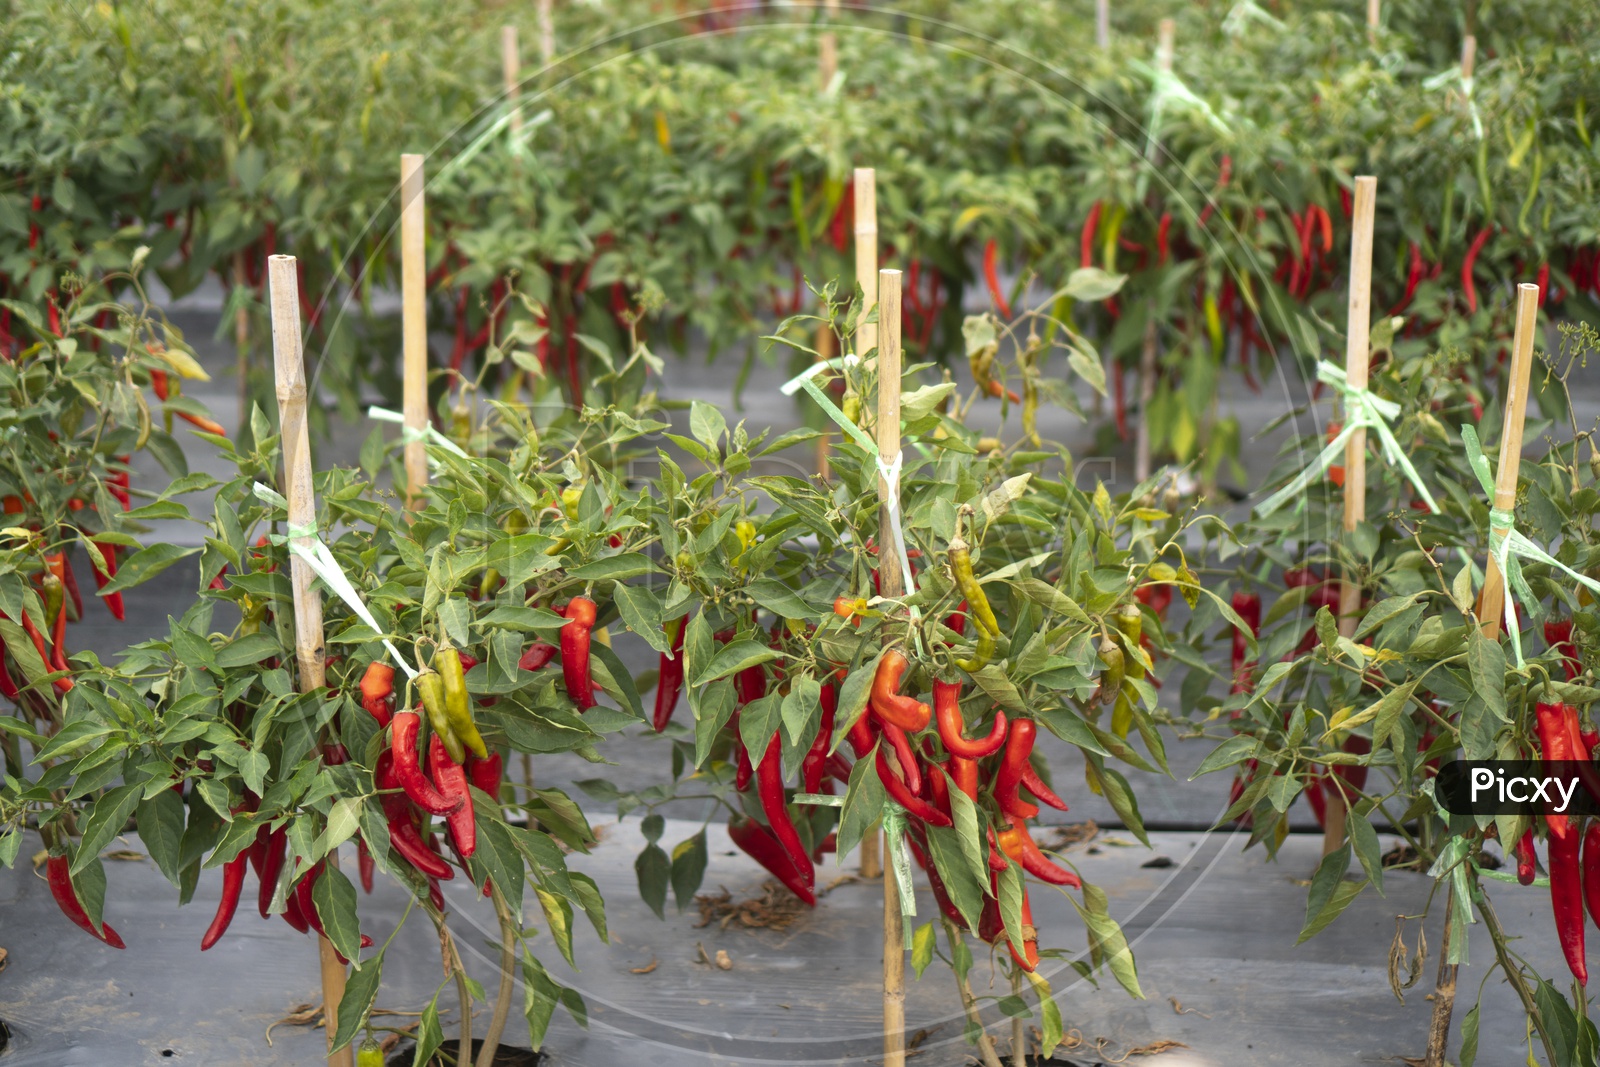 Chili plants Growing In a Modern Greenhouses